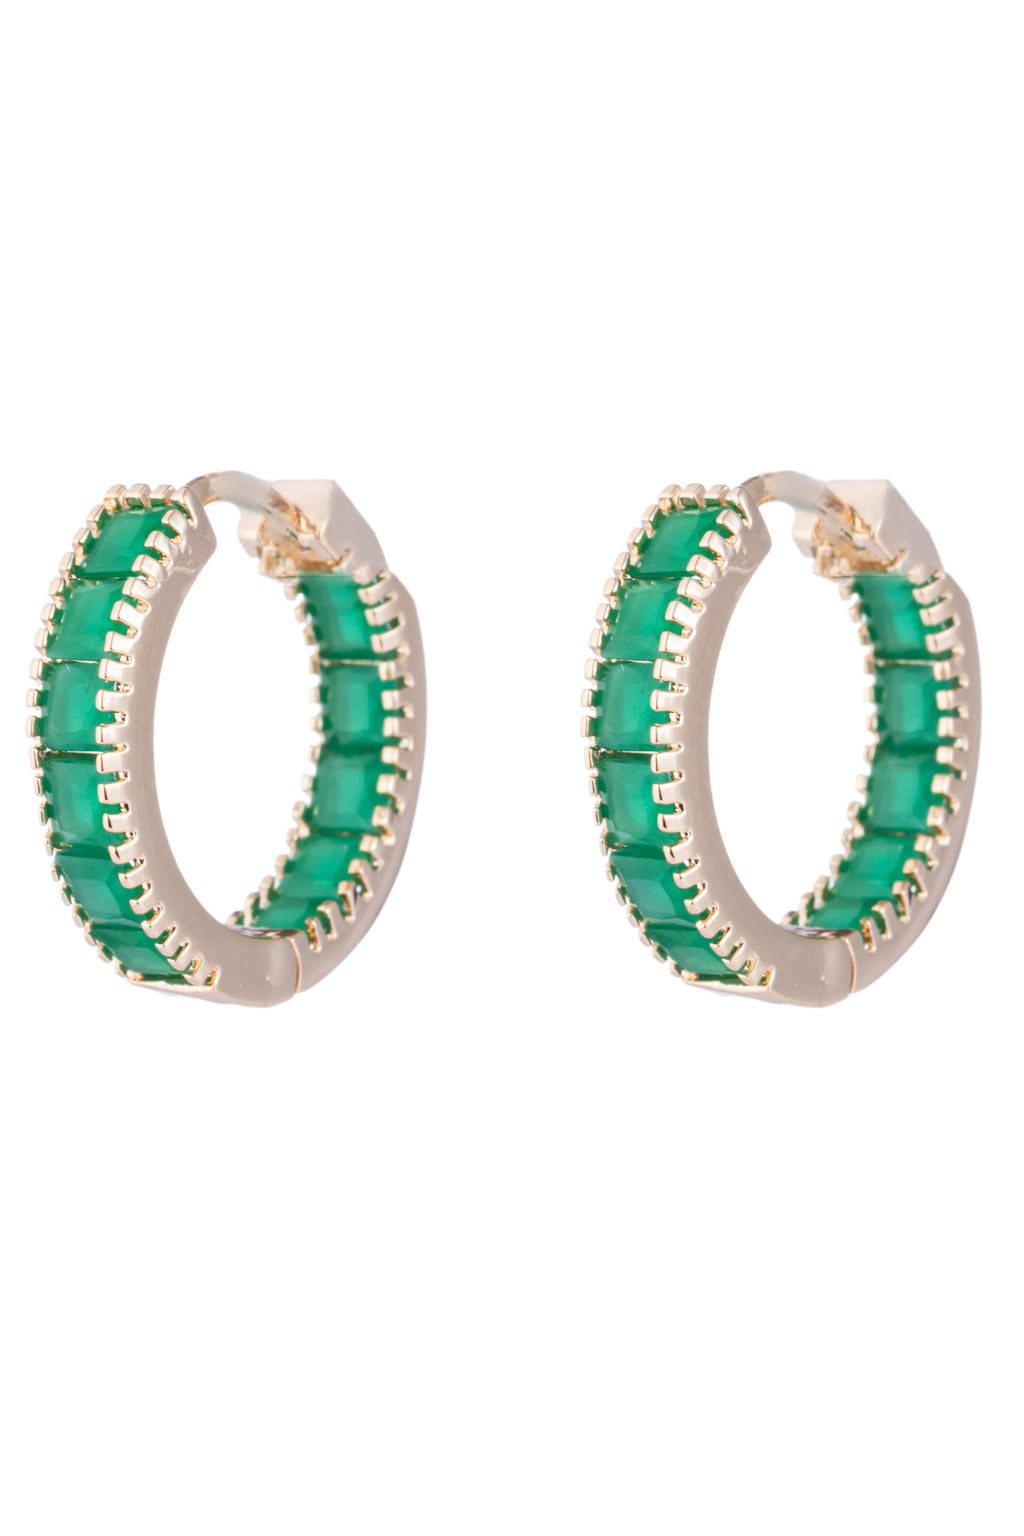 Pair of 0.5 inch gold huggie hoop earrings decorated with a row of small green cubic zirconia stones.